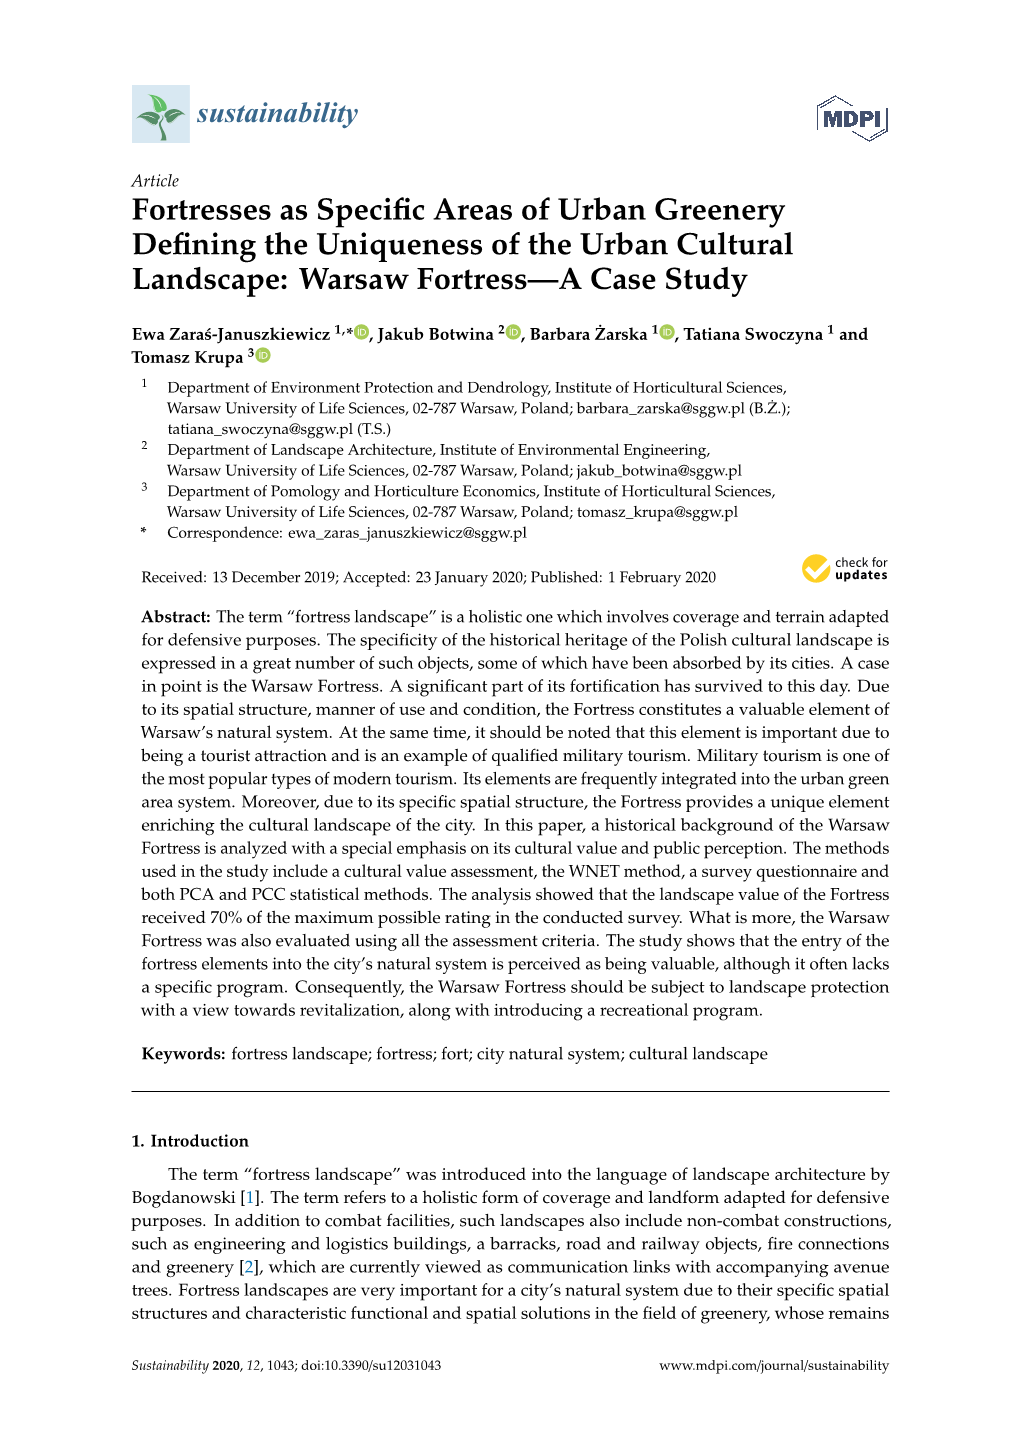 Fortresses As Specific Areas of Urban Greenery Defining the Uniqueness of the Urban Cultural Landscape